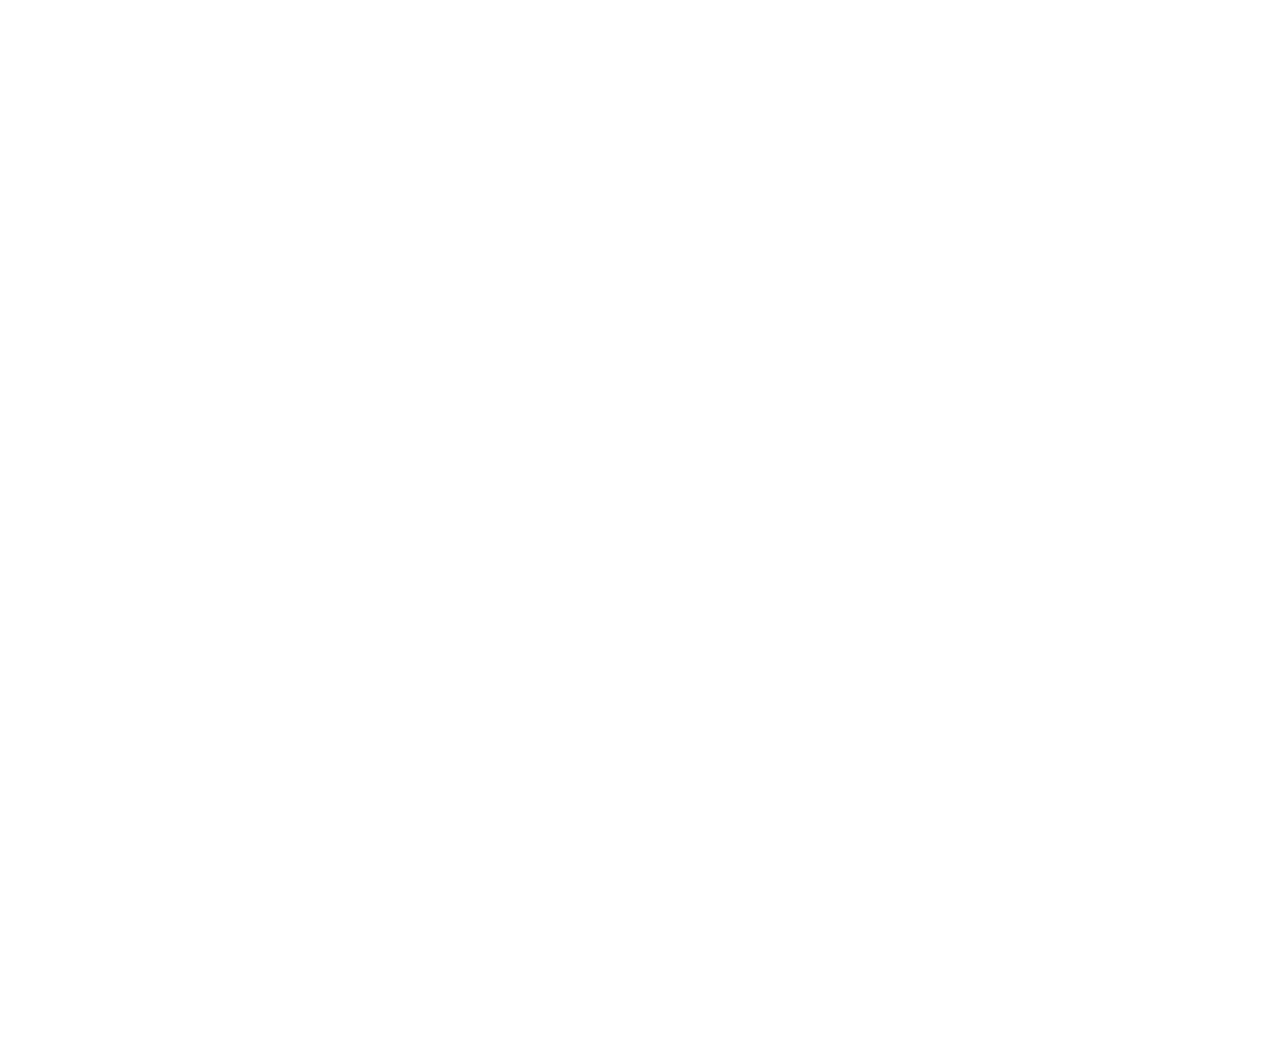 Bowlins Bow Ranch's web page